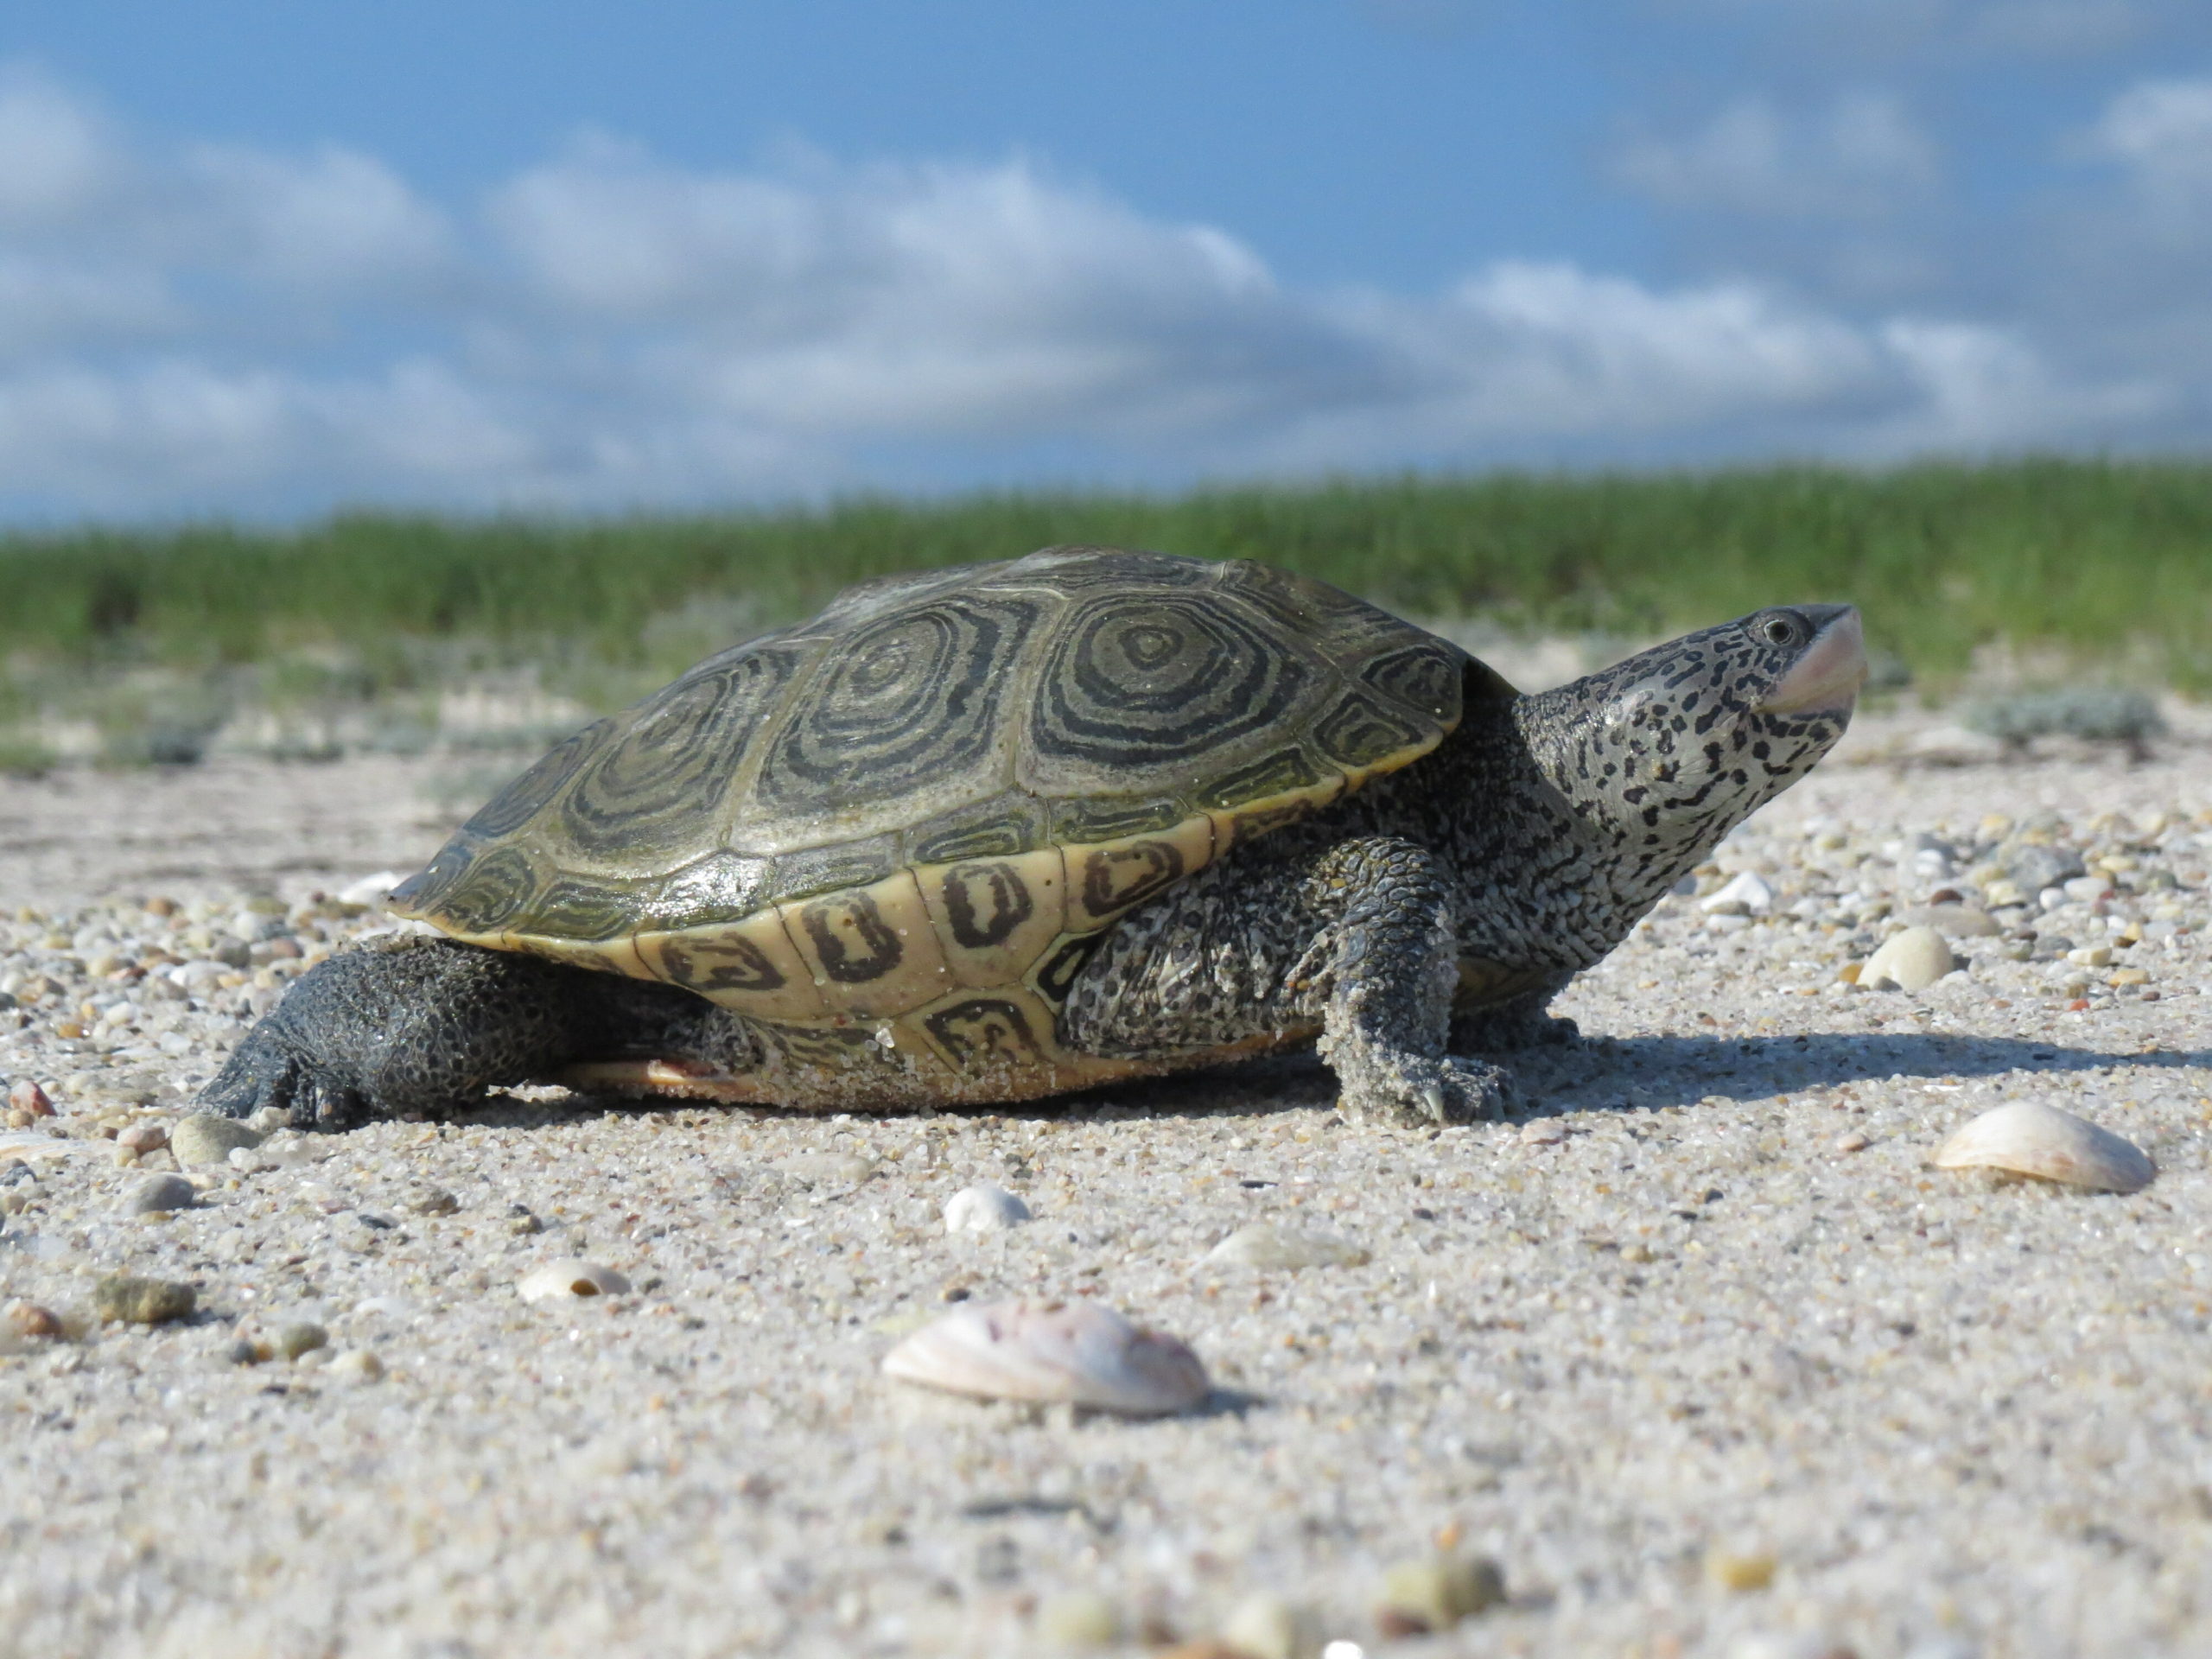 The 2020 L.I. Natural History Conference features 22 topics including mushrooms of L.I., fiddler crab’s role in the estuary, and diamondback terrapin conservation measures.